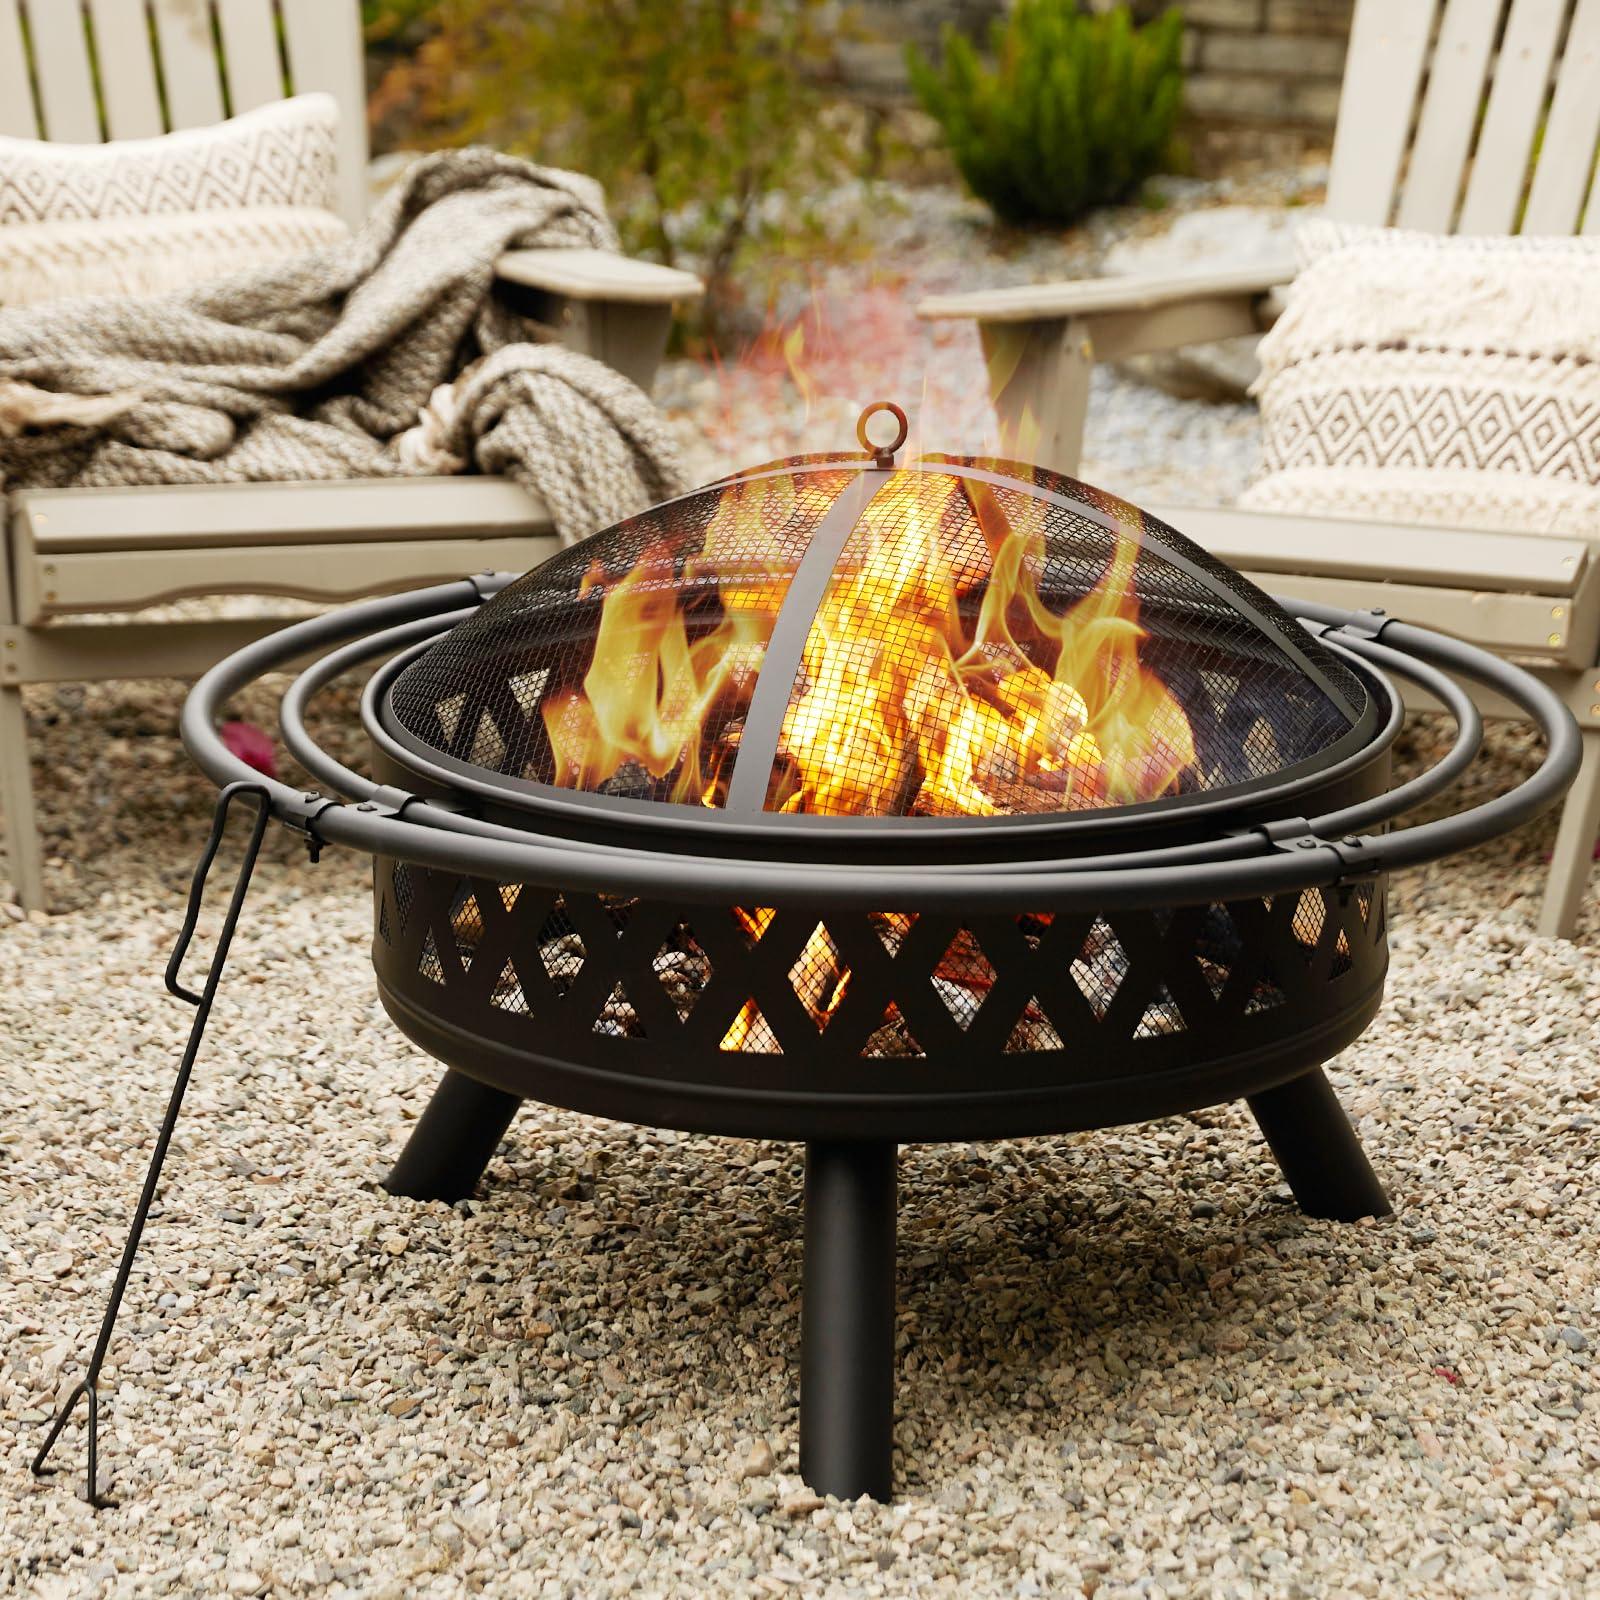 fissfire 35 Inch Fire Pit, Outdoor Wood Burning Fire Pit Crossweave with Spark Screen Fire Poker with 2 Loops, for Backyard Patio Garden Bonfire, Black - CookCave